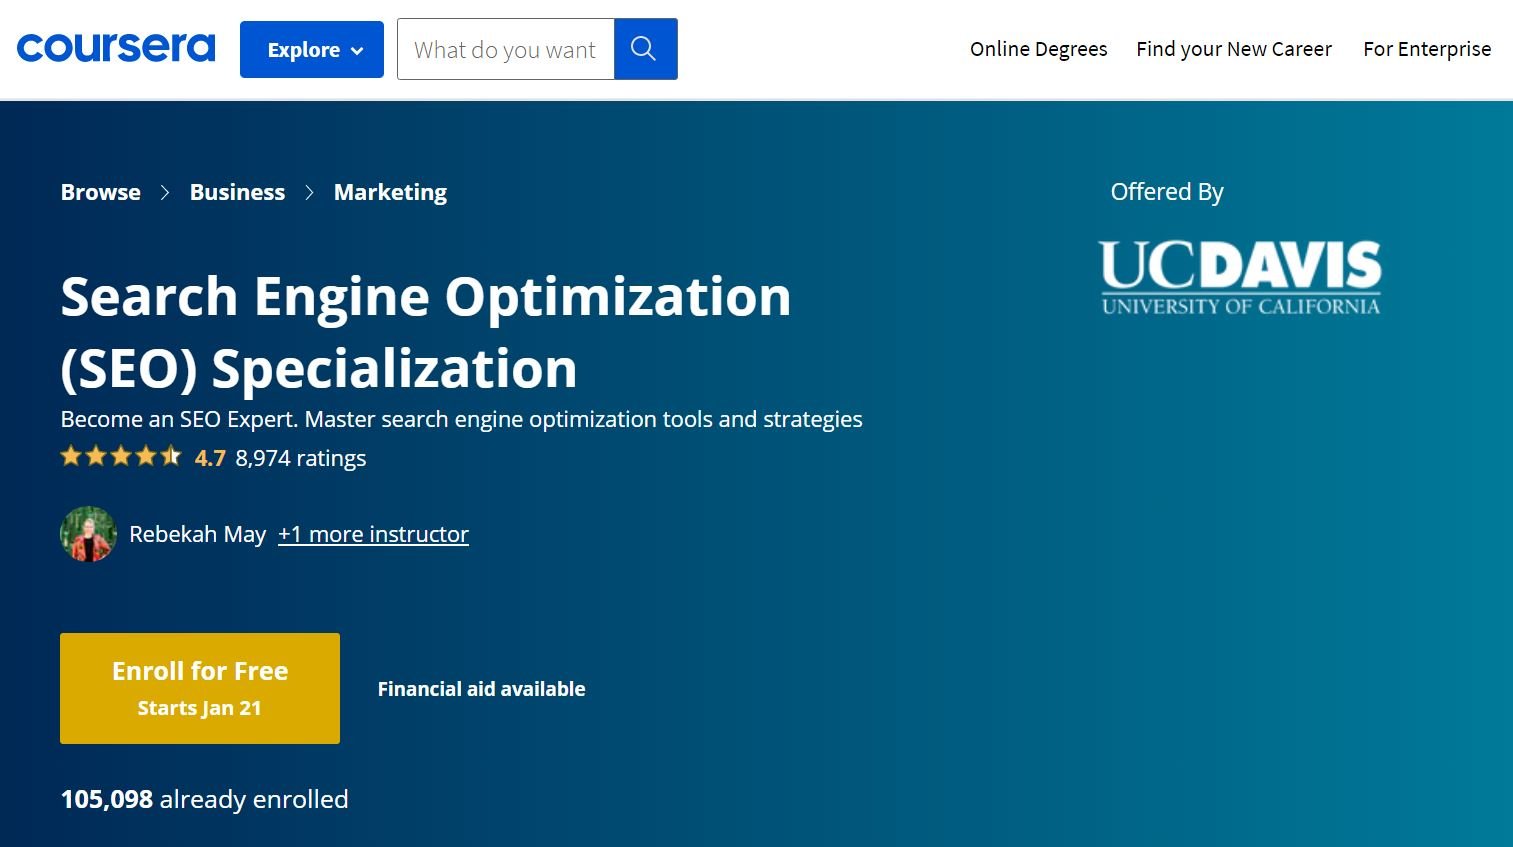 The SEO Specialization course on Coursera